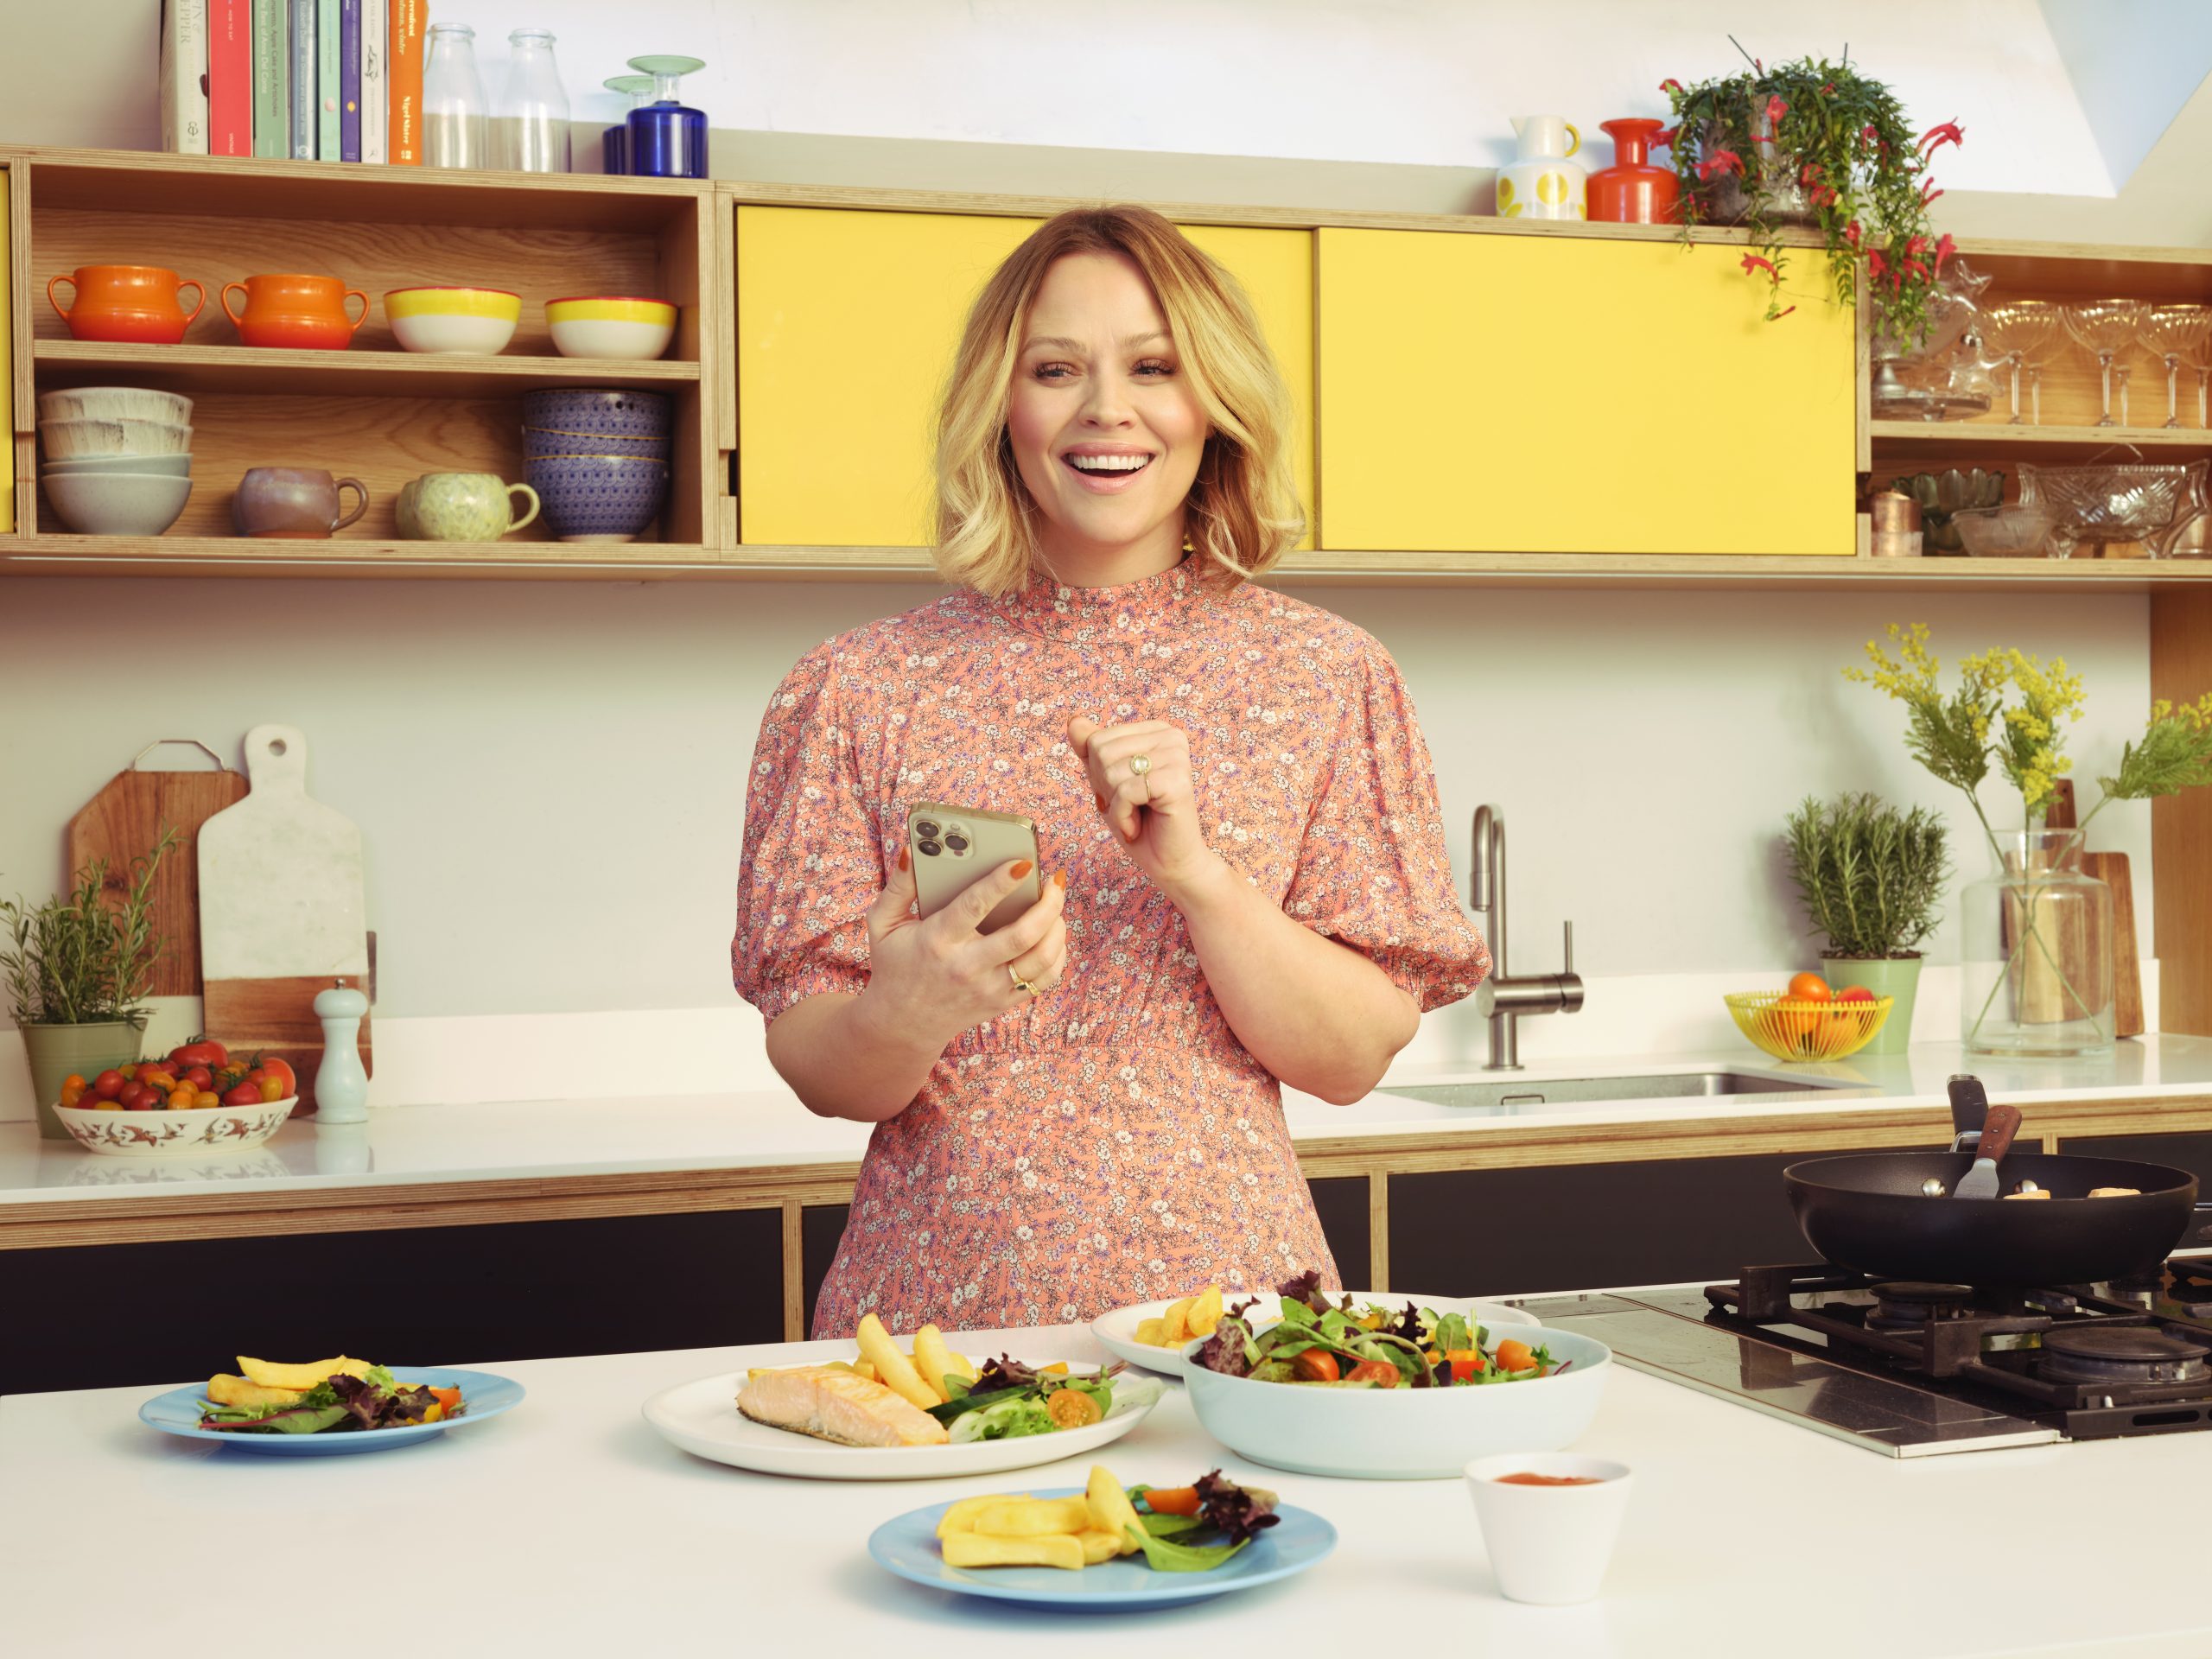 McCain partners with Kimberley Walsh to launch ‘Teatime to Talk’